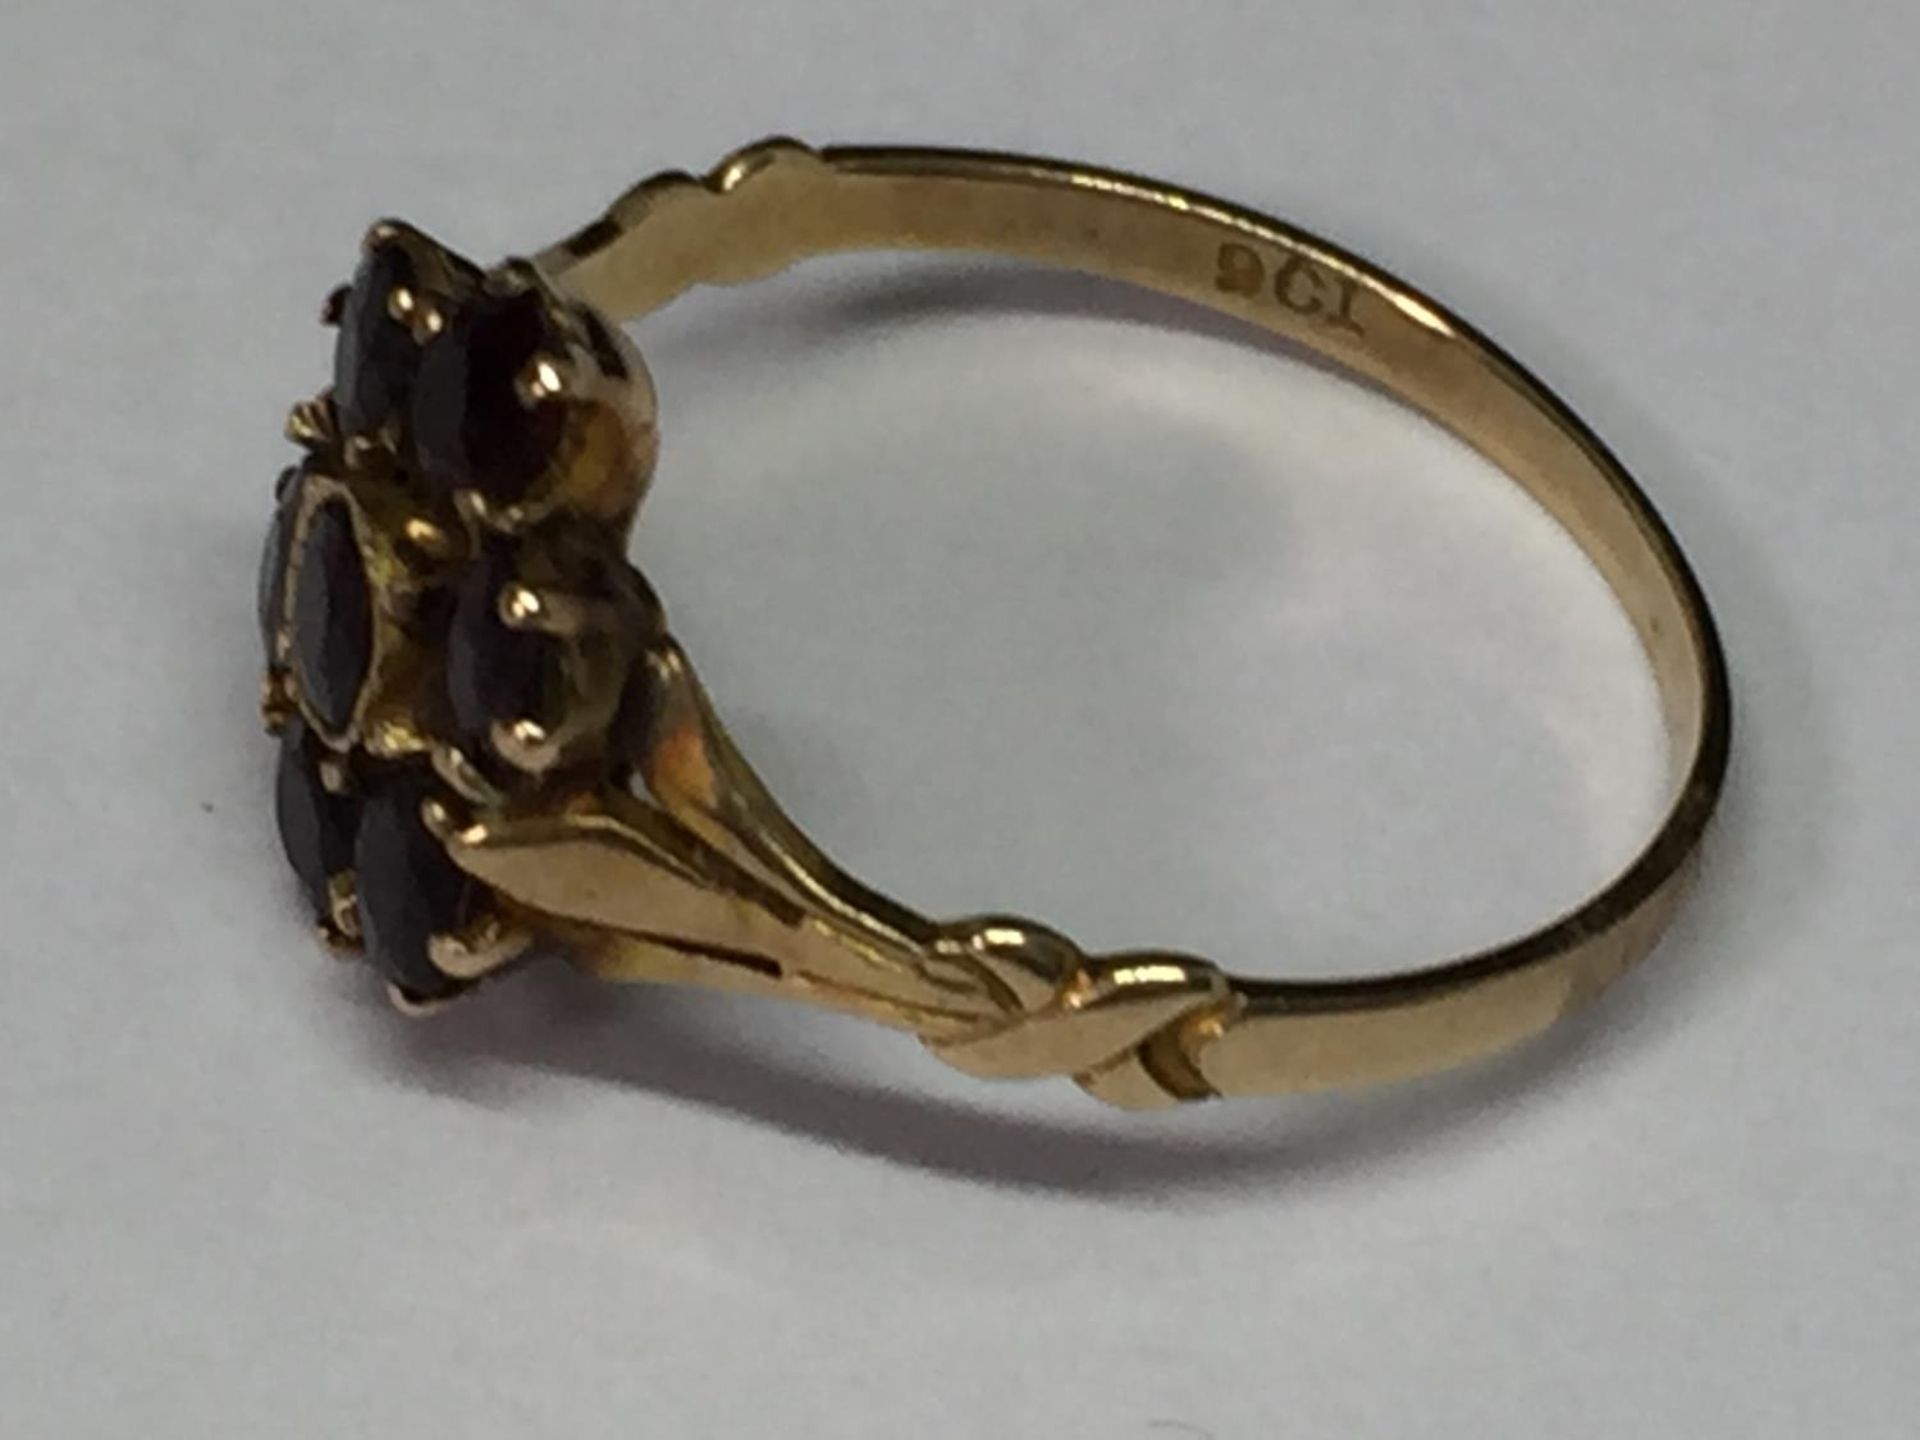 A 9 CARAT GOLD RING WITH SEVEN GARNETS IN A FLOWER DESIGN SIZE L/M - Image 2 of 3